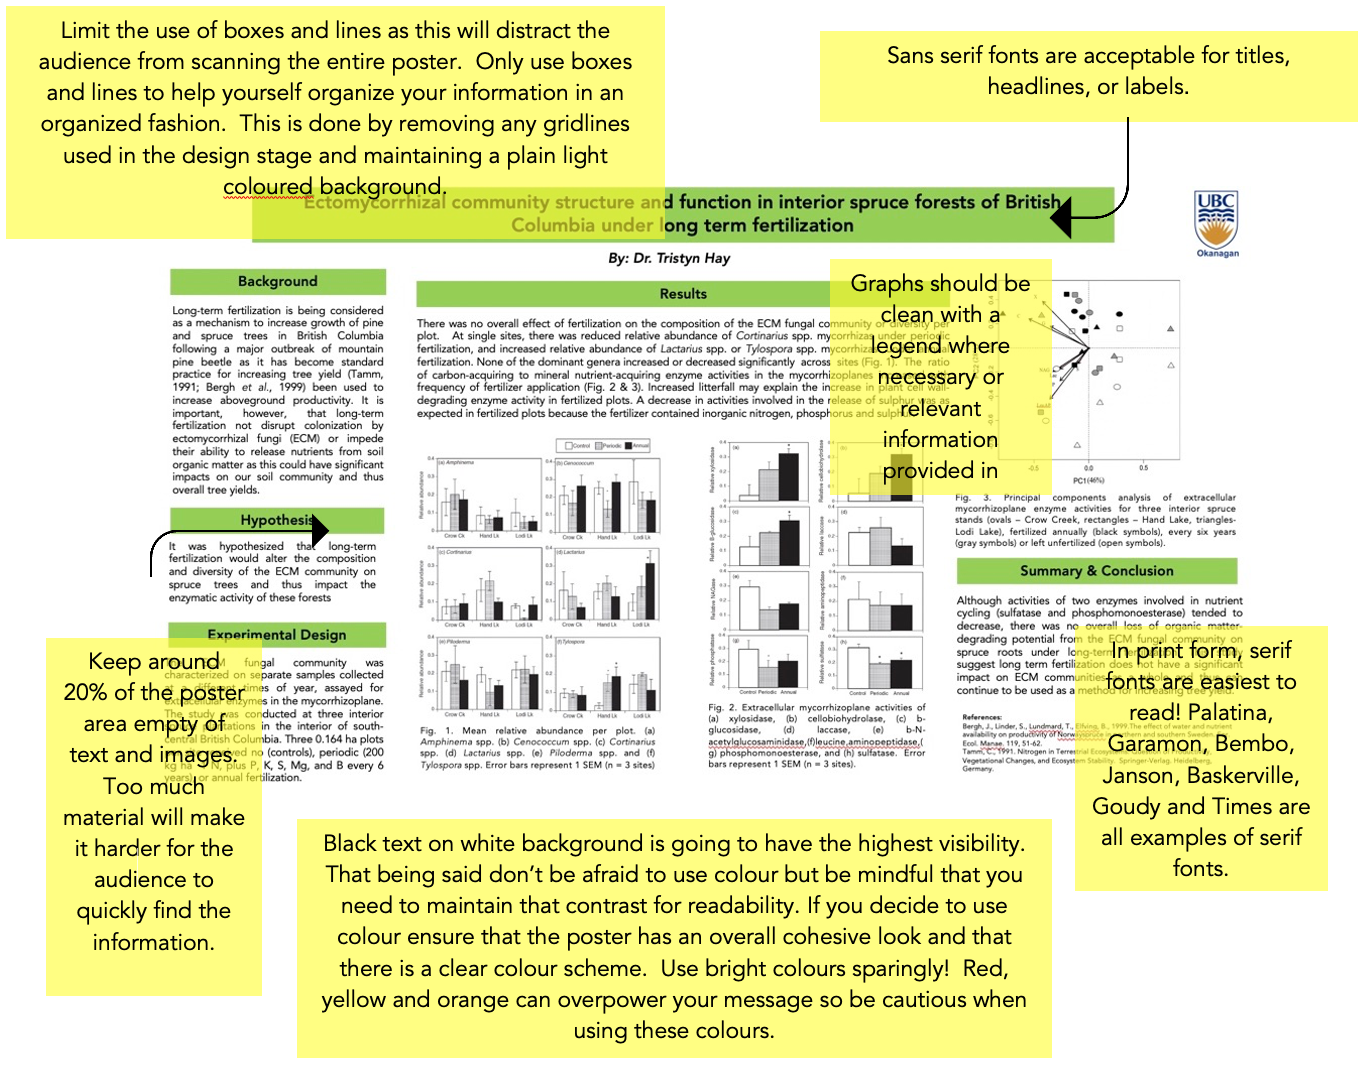 Figure 1. A Well Designed Poster. Poster design by Dr. Tristyn Hay.